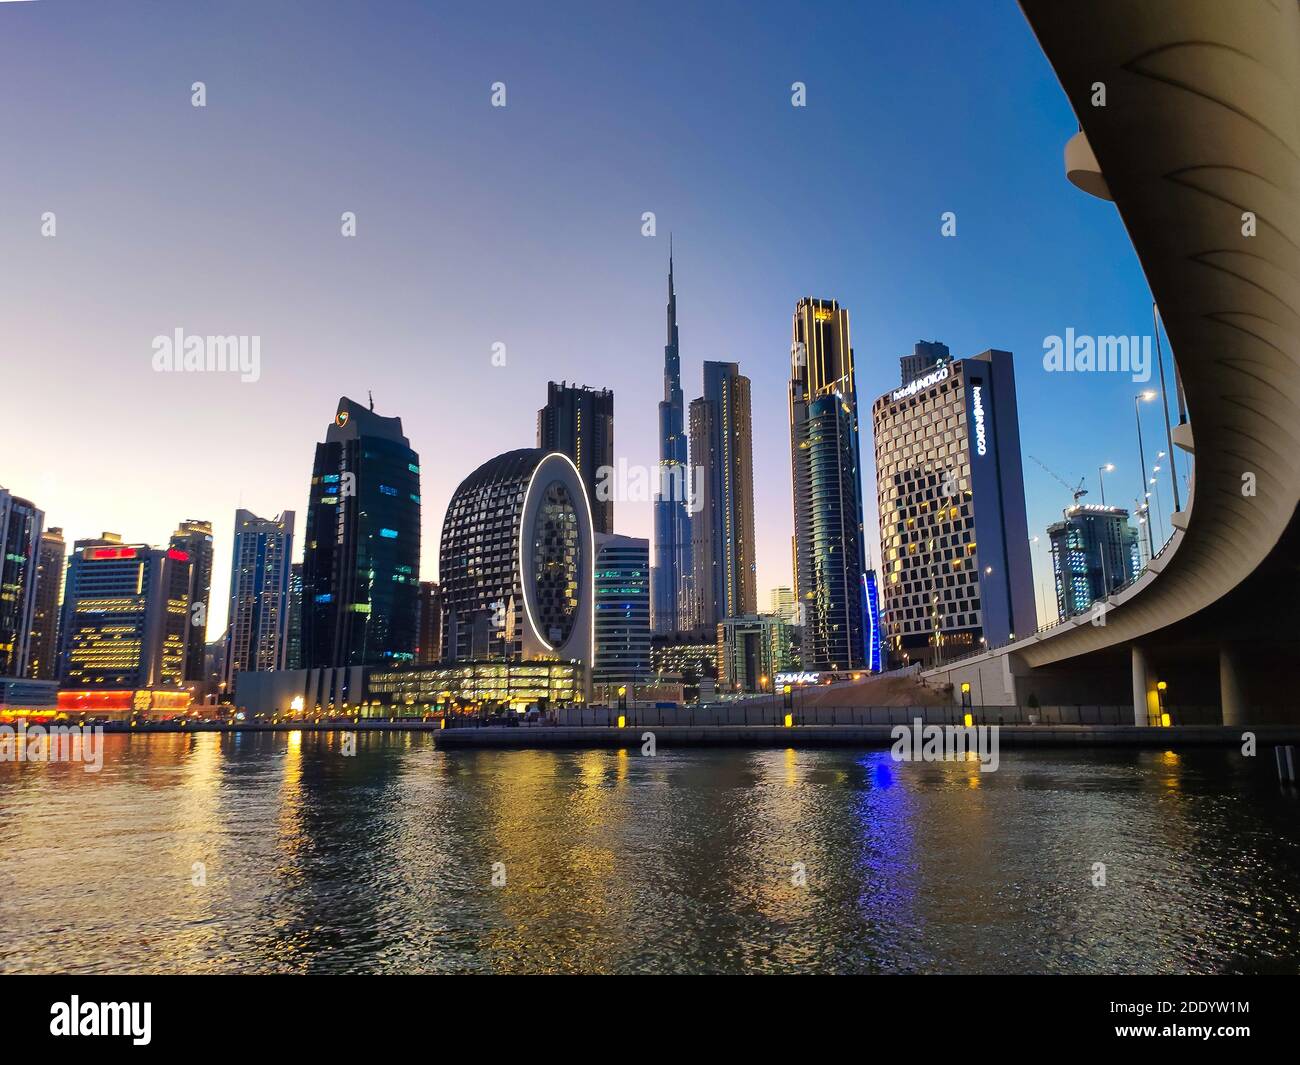 Dubai, United Arab Emirates - October 19, 2020: Downtown Dubai modern cityscape skyline view from the Marasi marina in the Business Bay at sunset in t Stock Photo